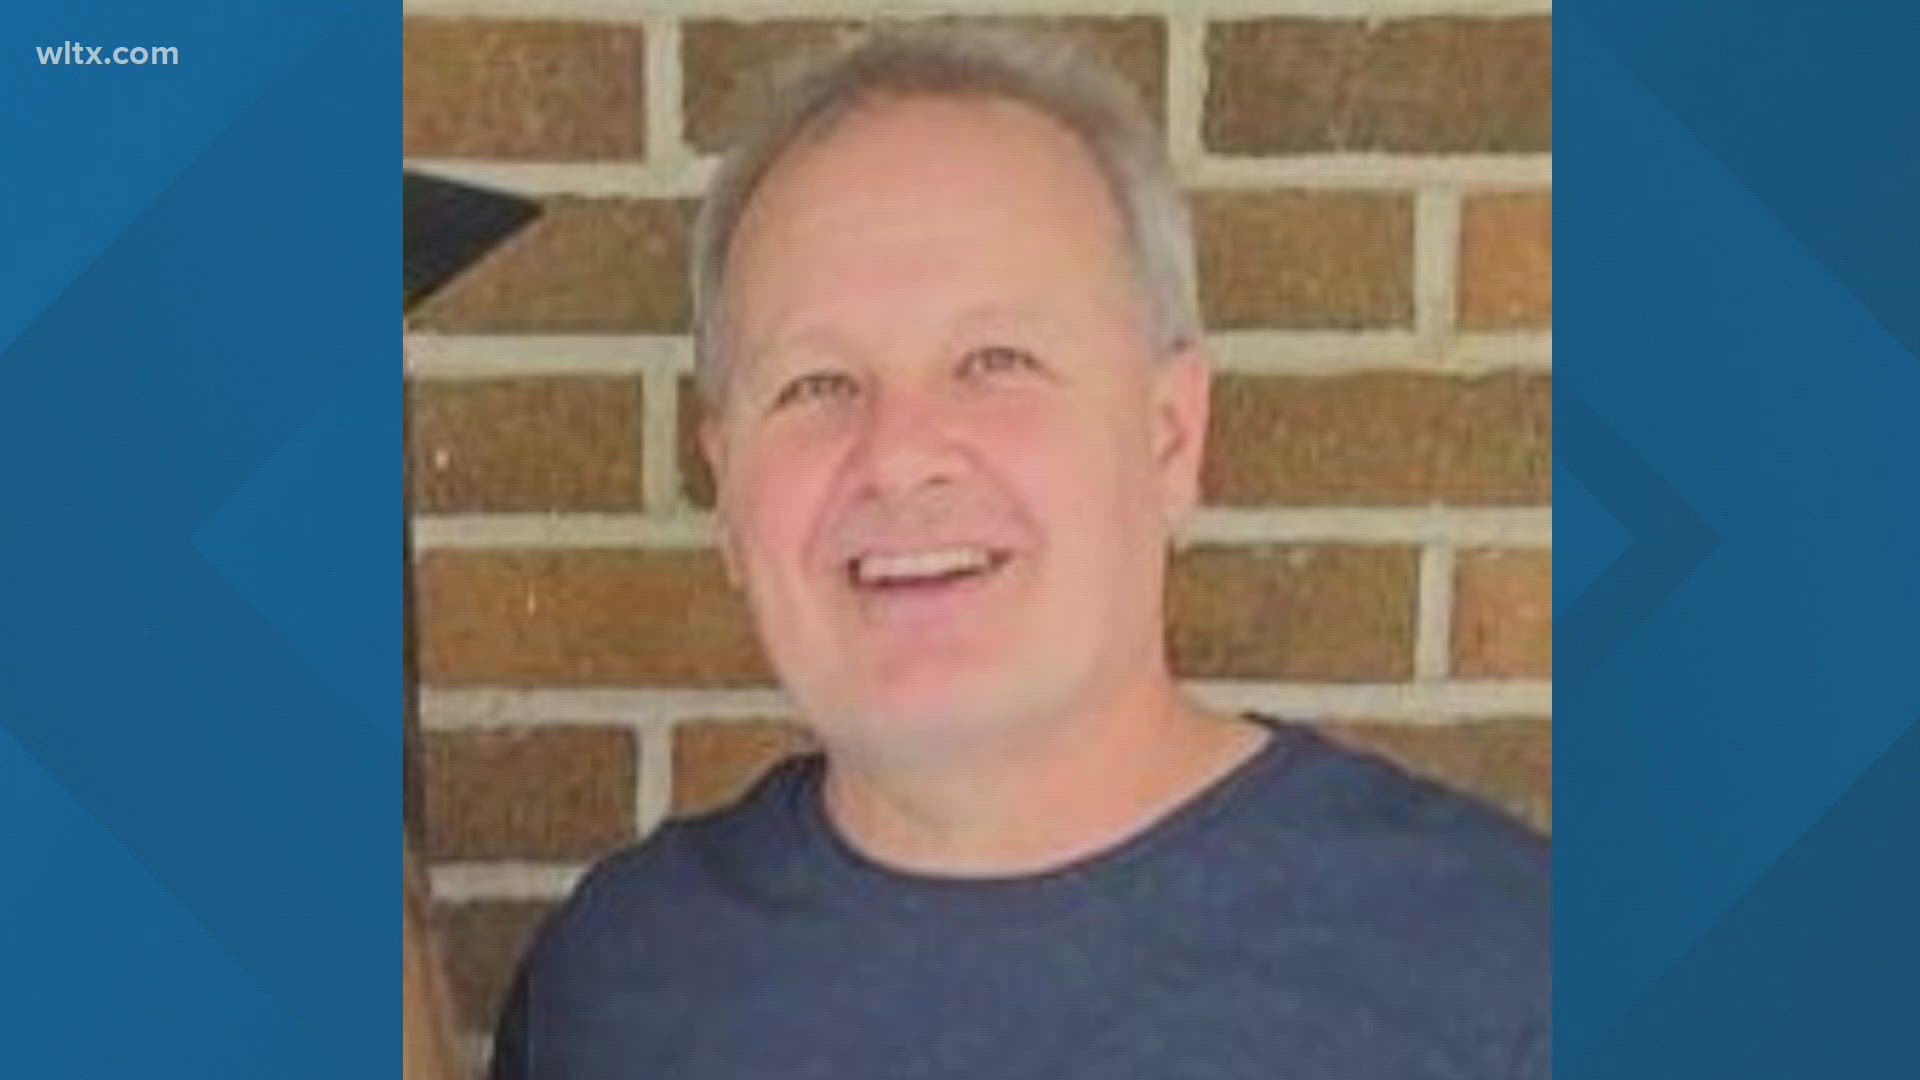 According to the company, Timothy McCormick, 56, died at a hospital las week with a serious electrical accident.